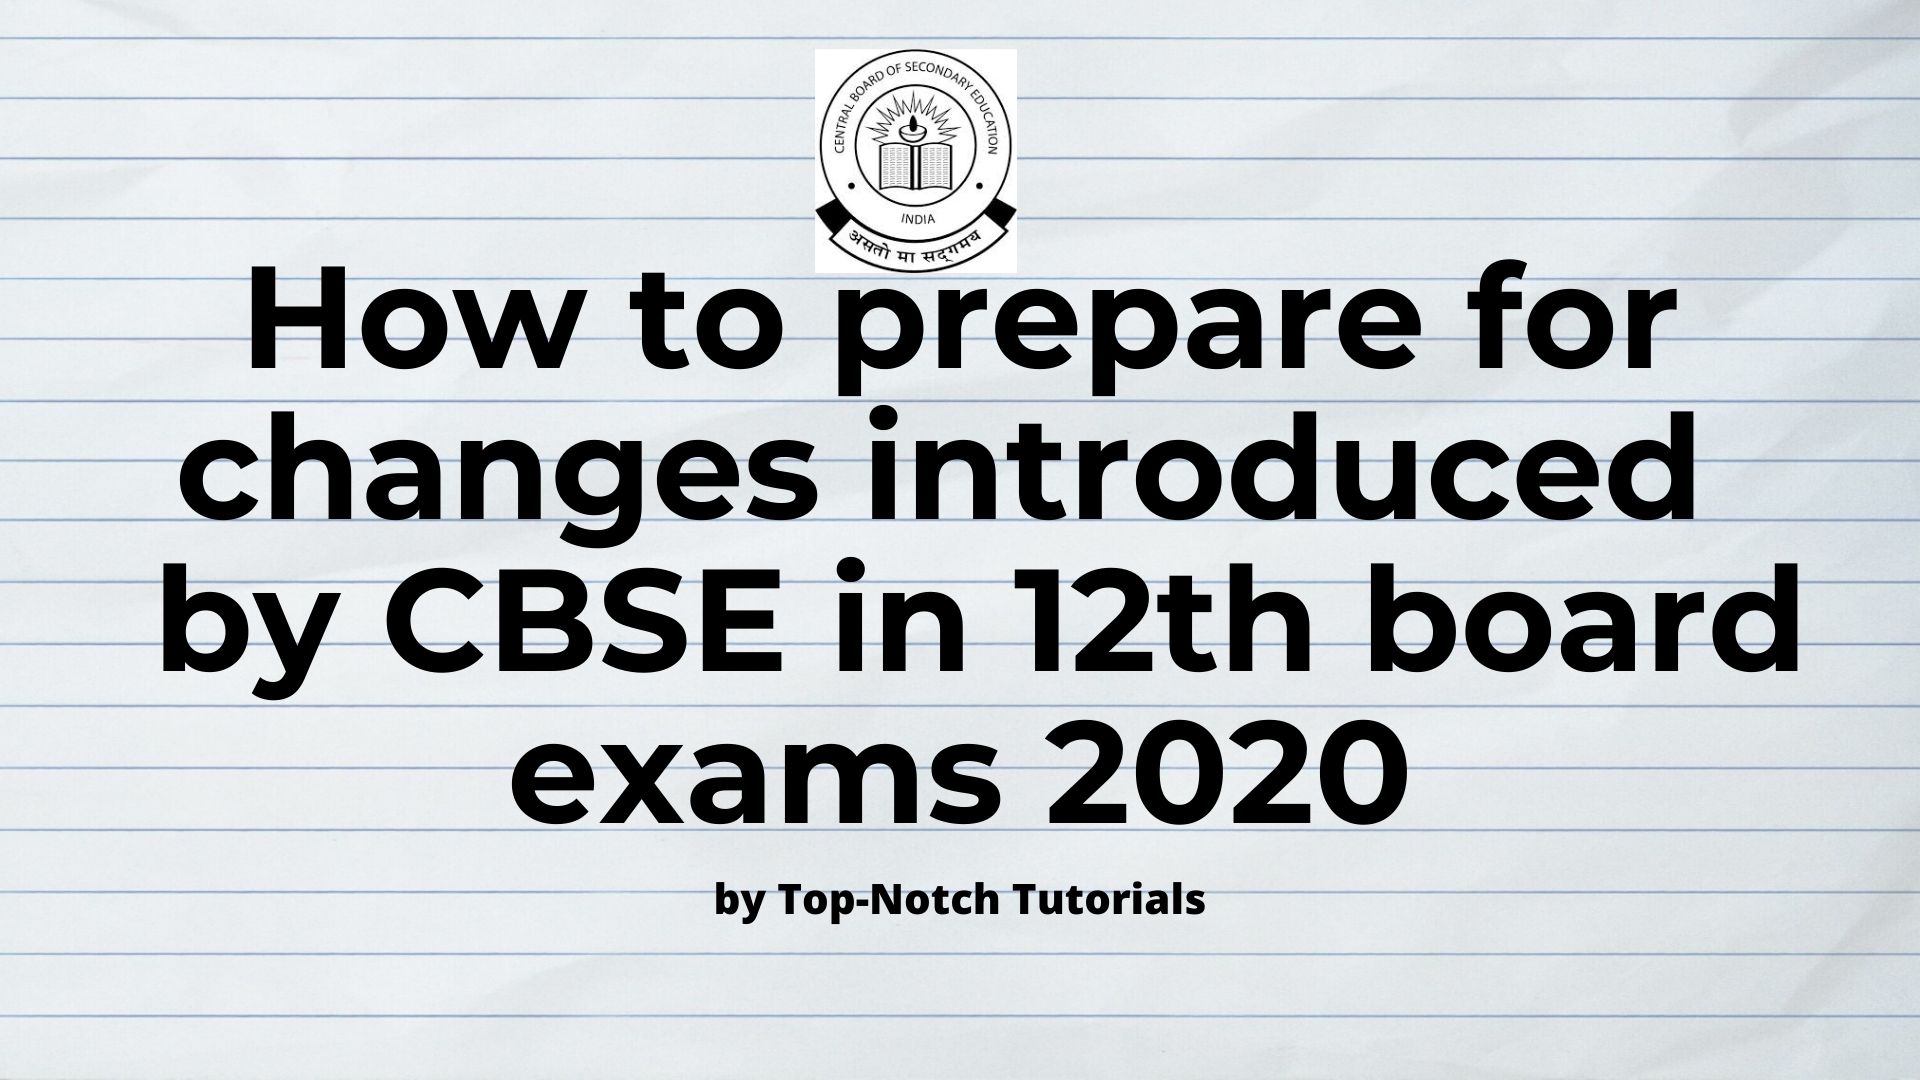 Major changes introduced in CBSE 12th board exams 2020